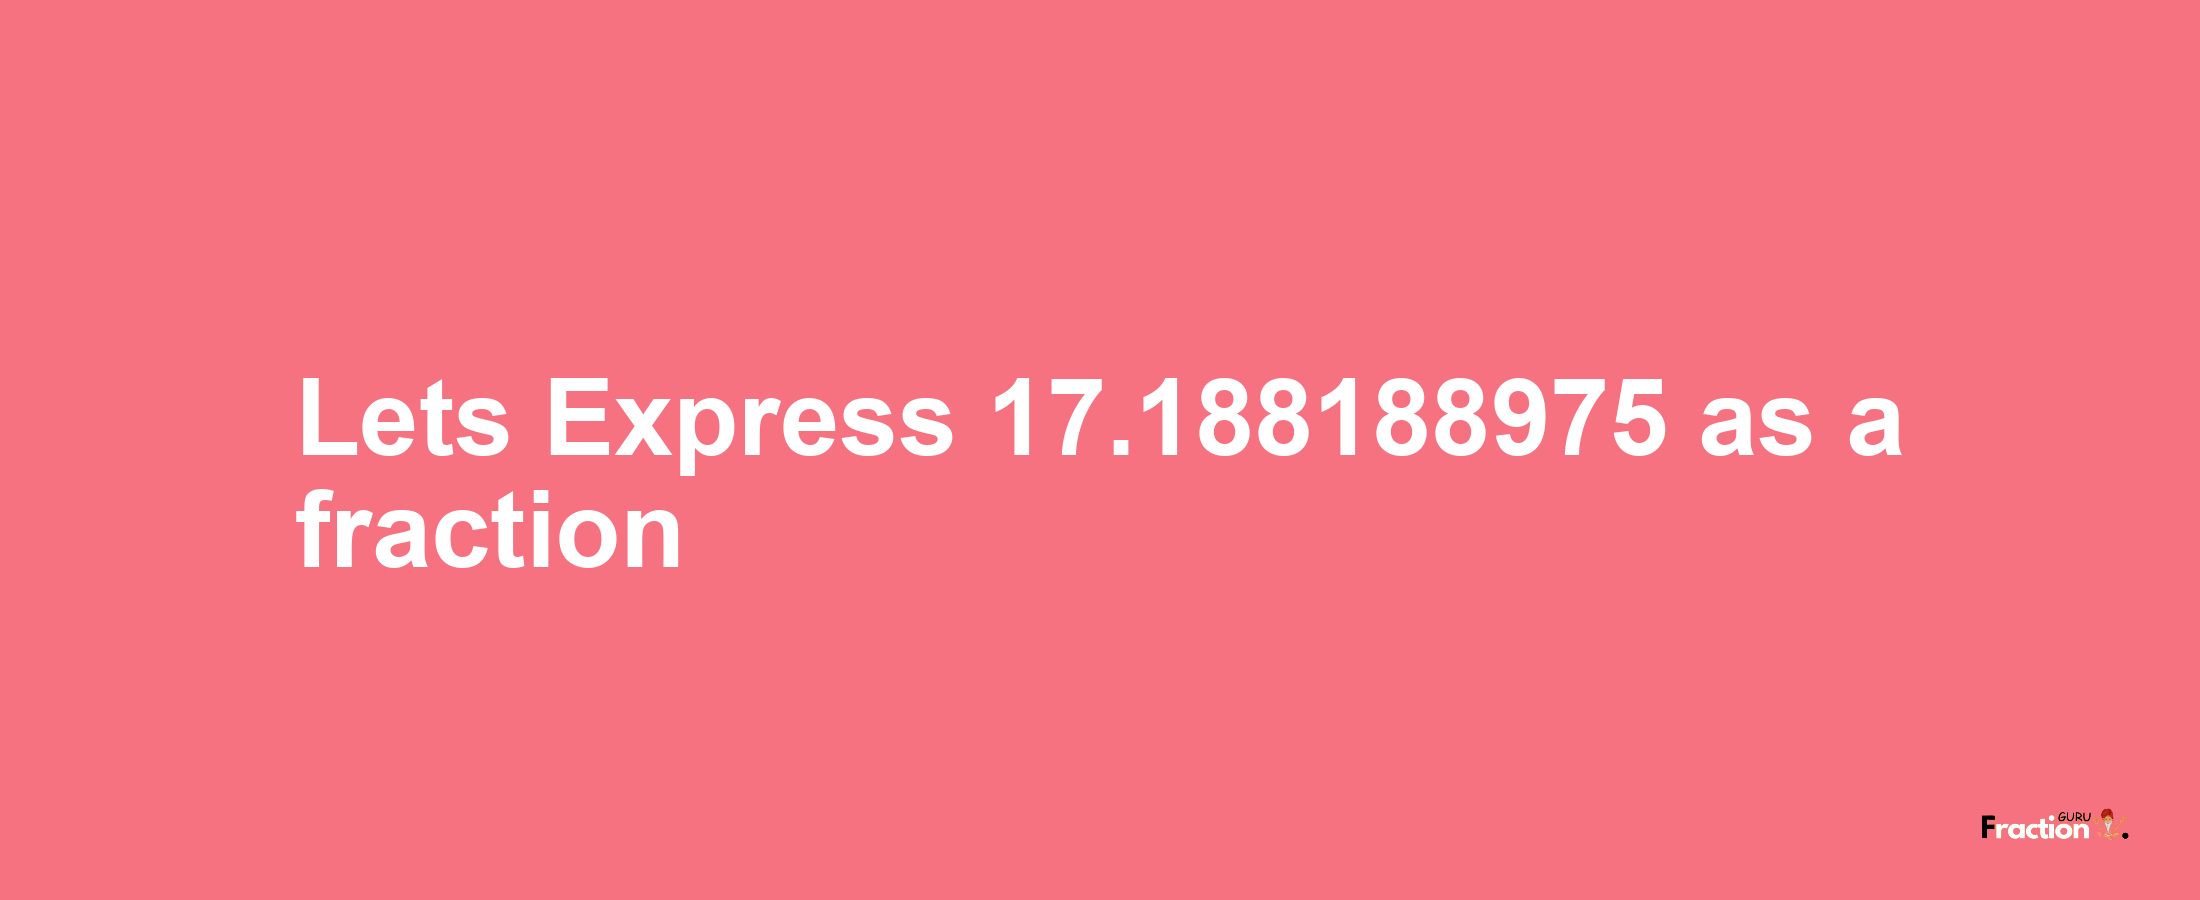 Lets Express 17.188188975 as afraction